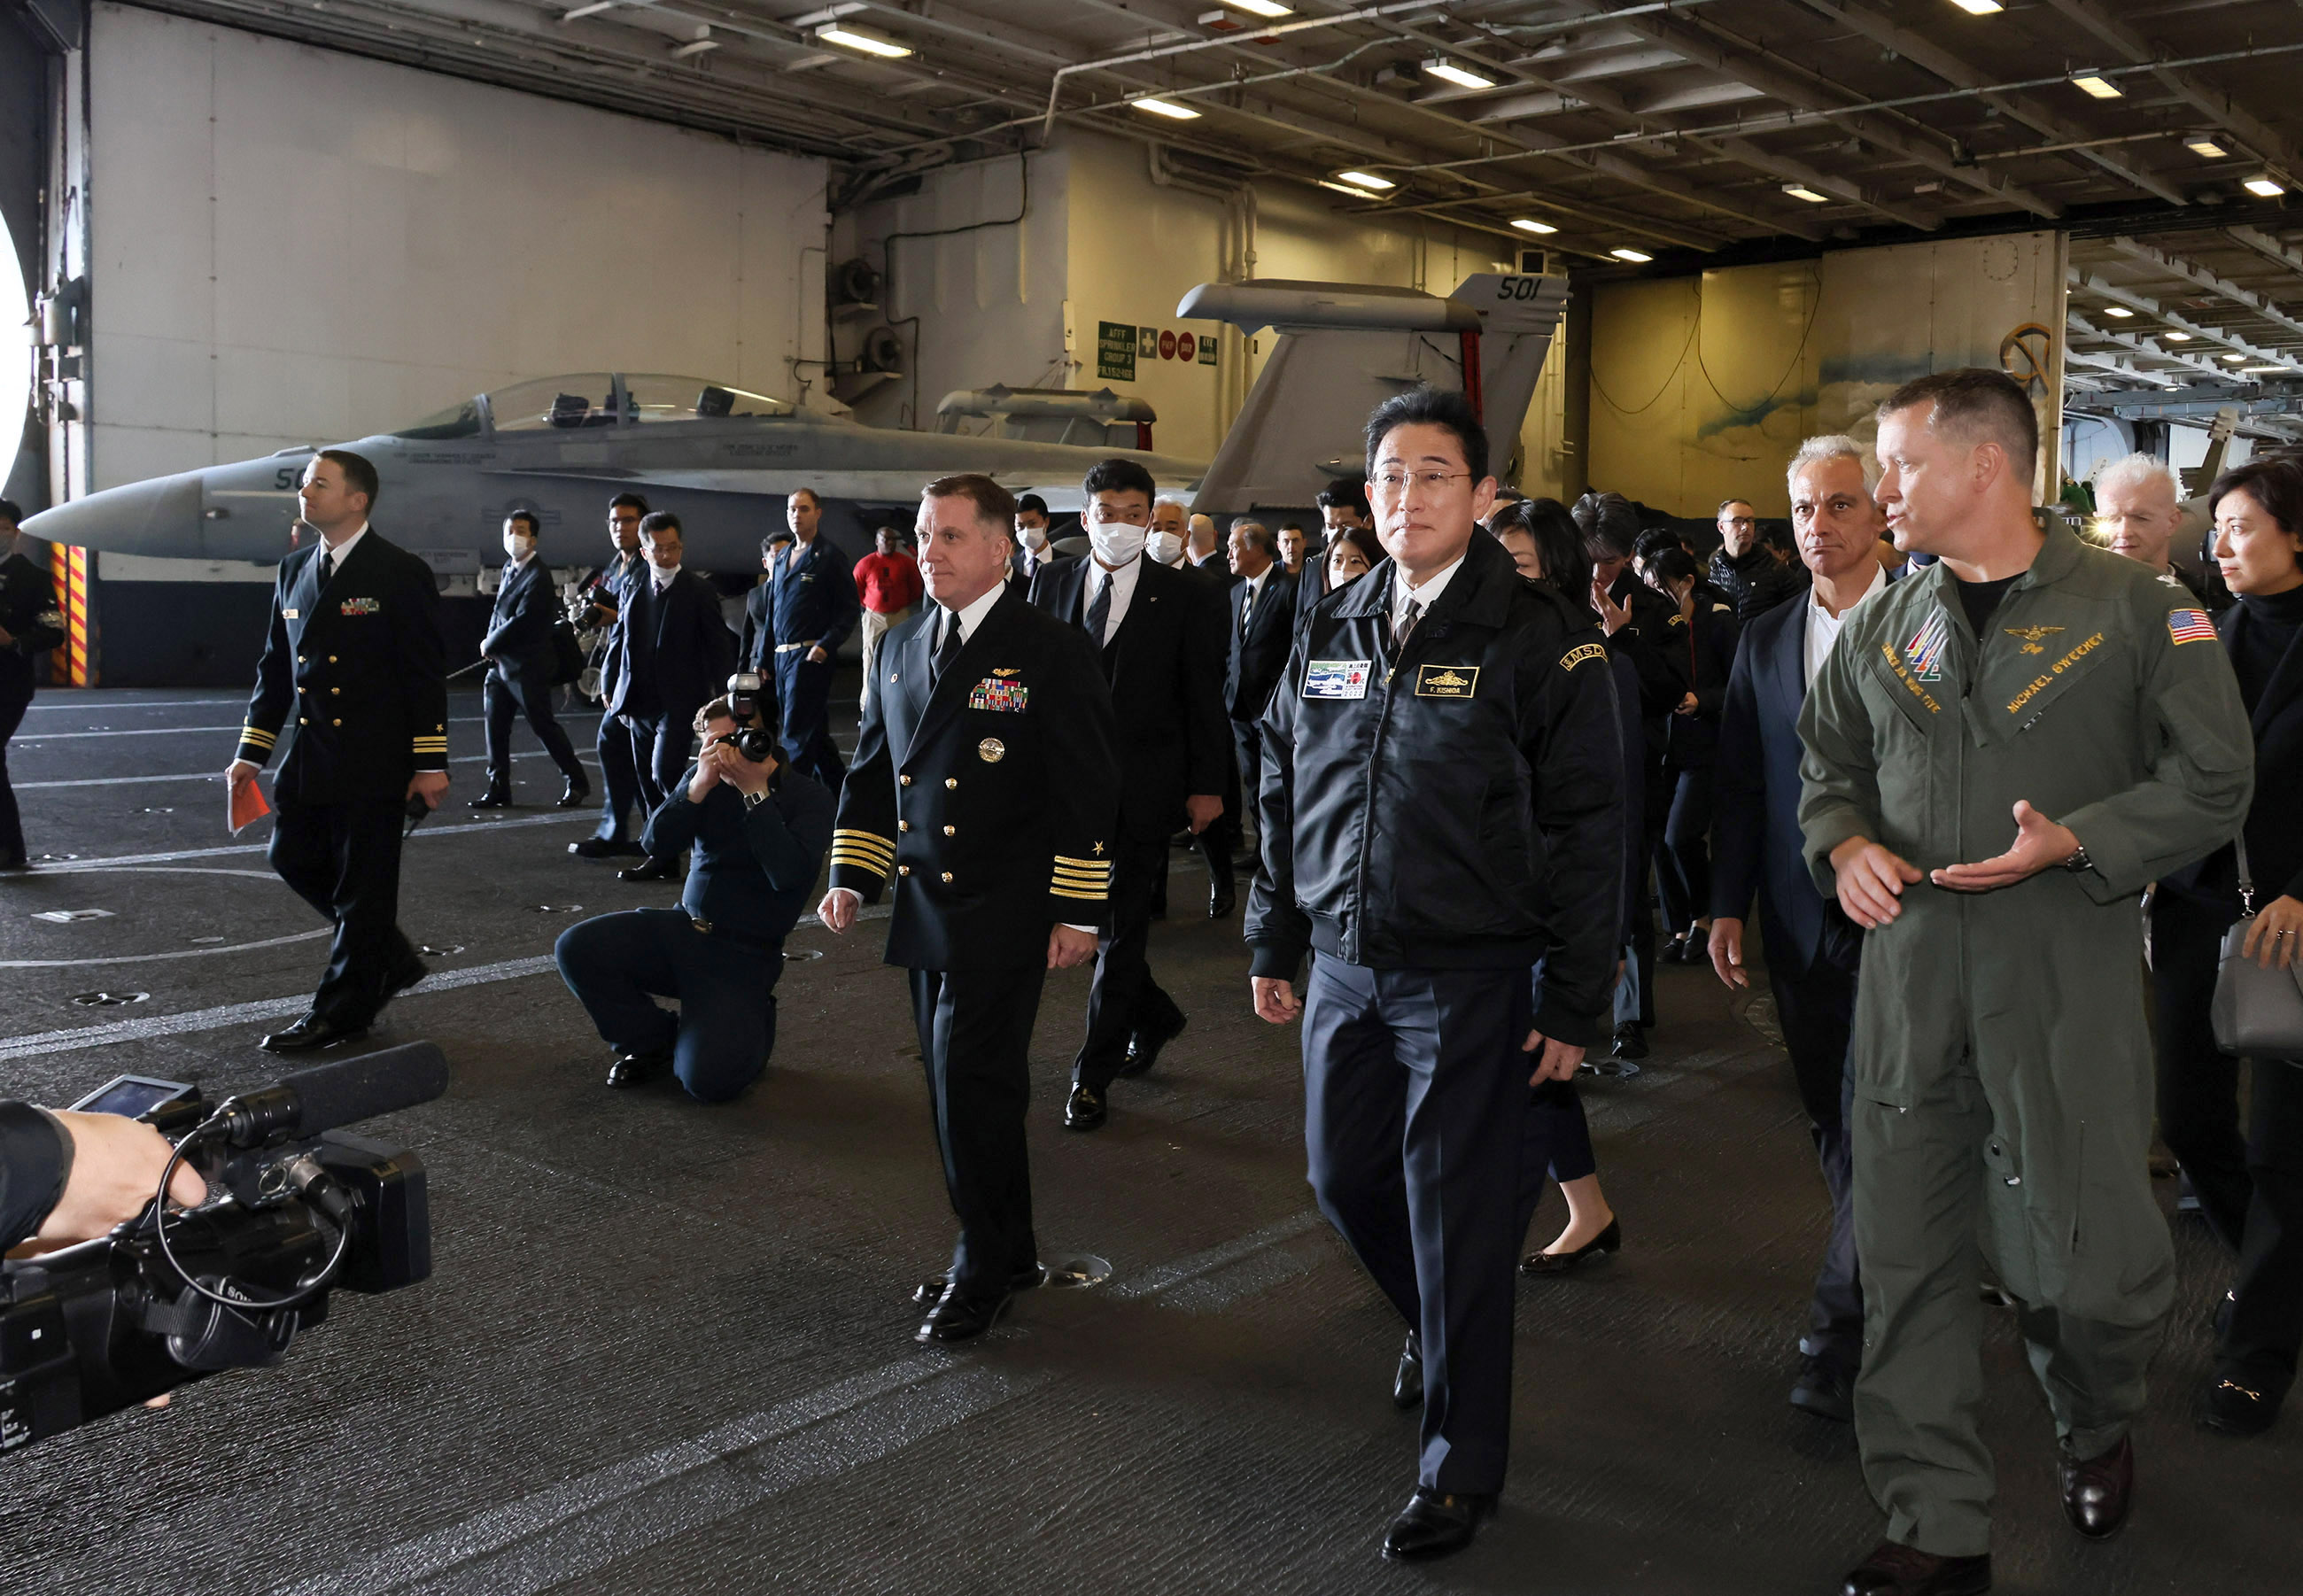 Photograph of the Prime Minister touring the U.S. aircraft carrier (3)